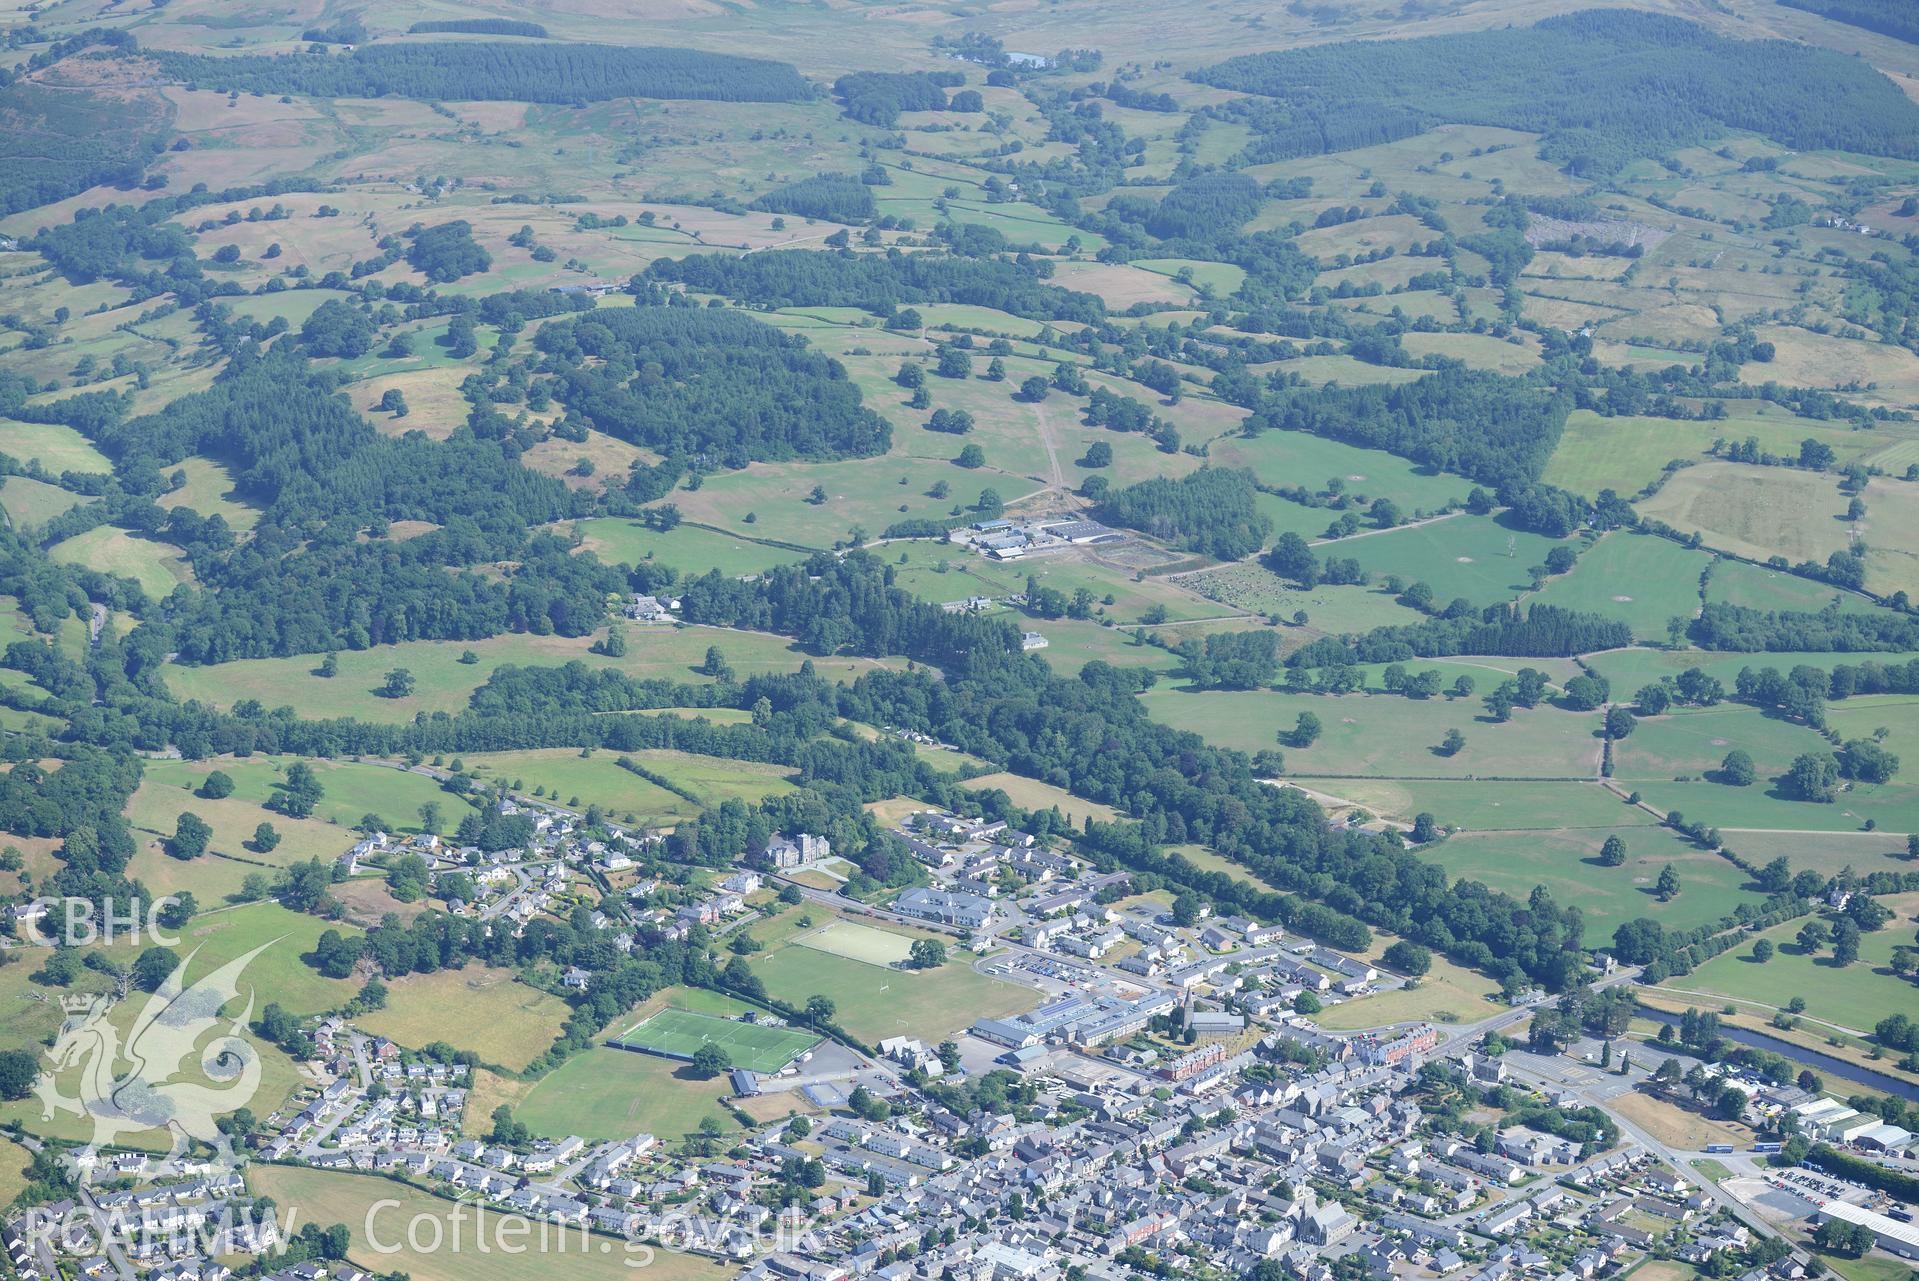 Royal Commission aerial photography of Bala taken on 19th July 2018 during the 2018 drought.